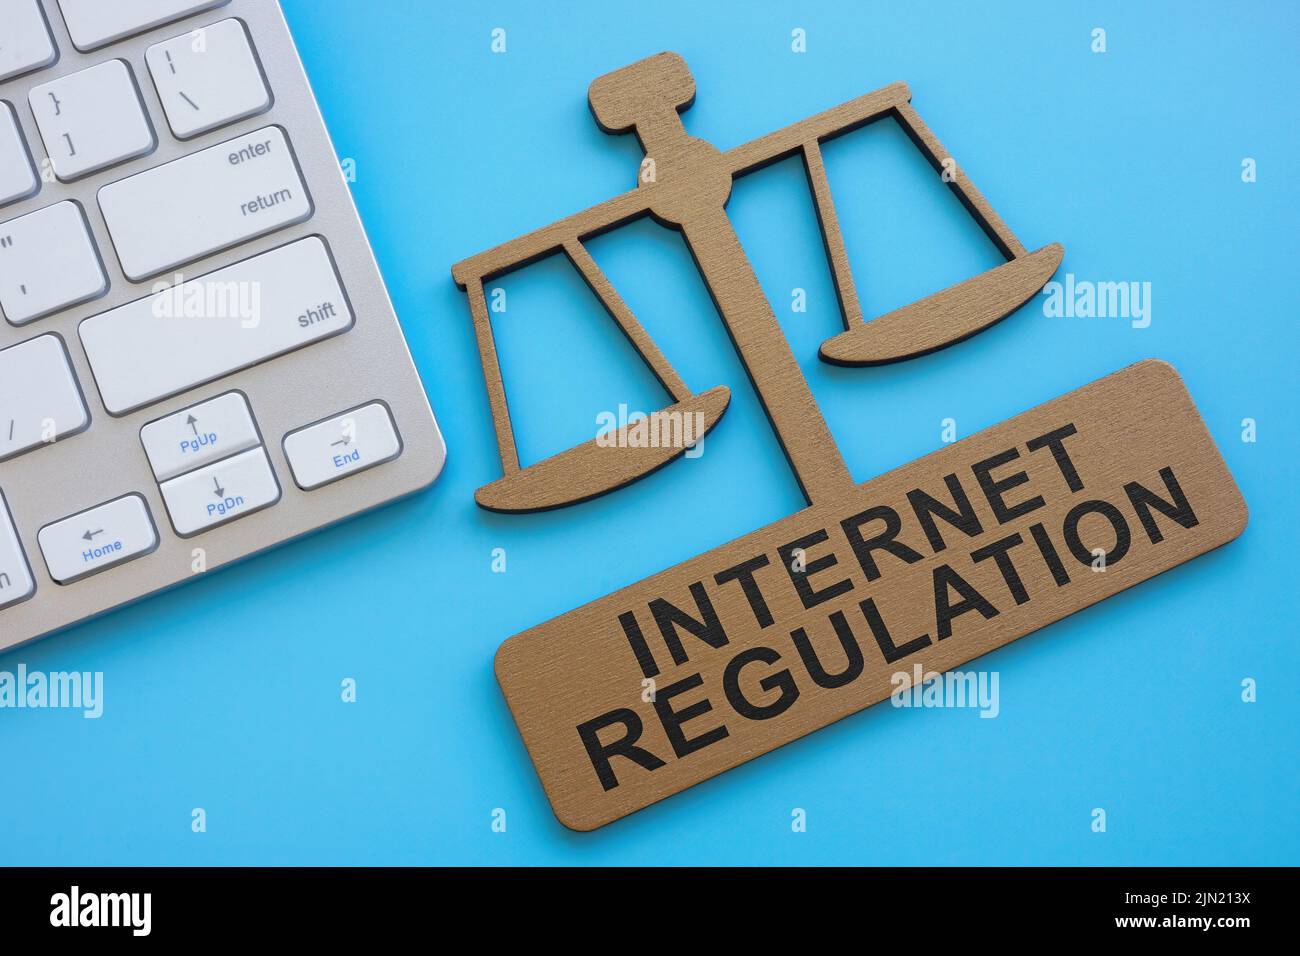 Keyboard and plate in the form of scales with sign internet regulation. Stock Photo